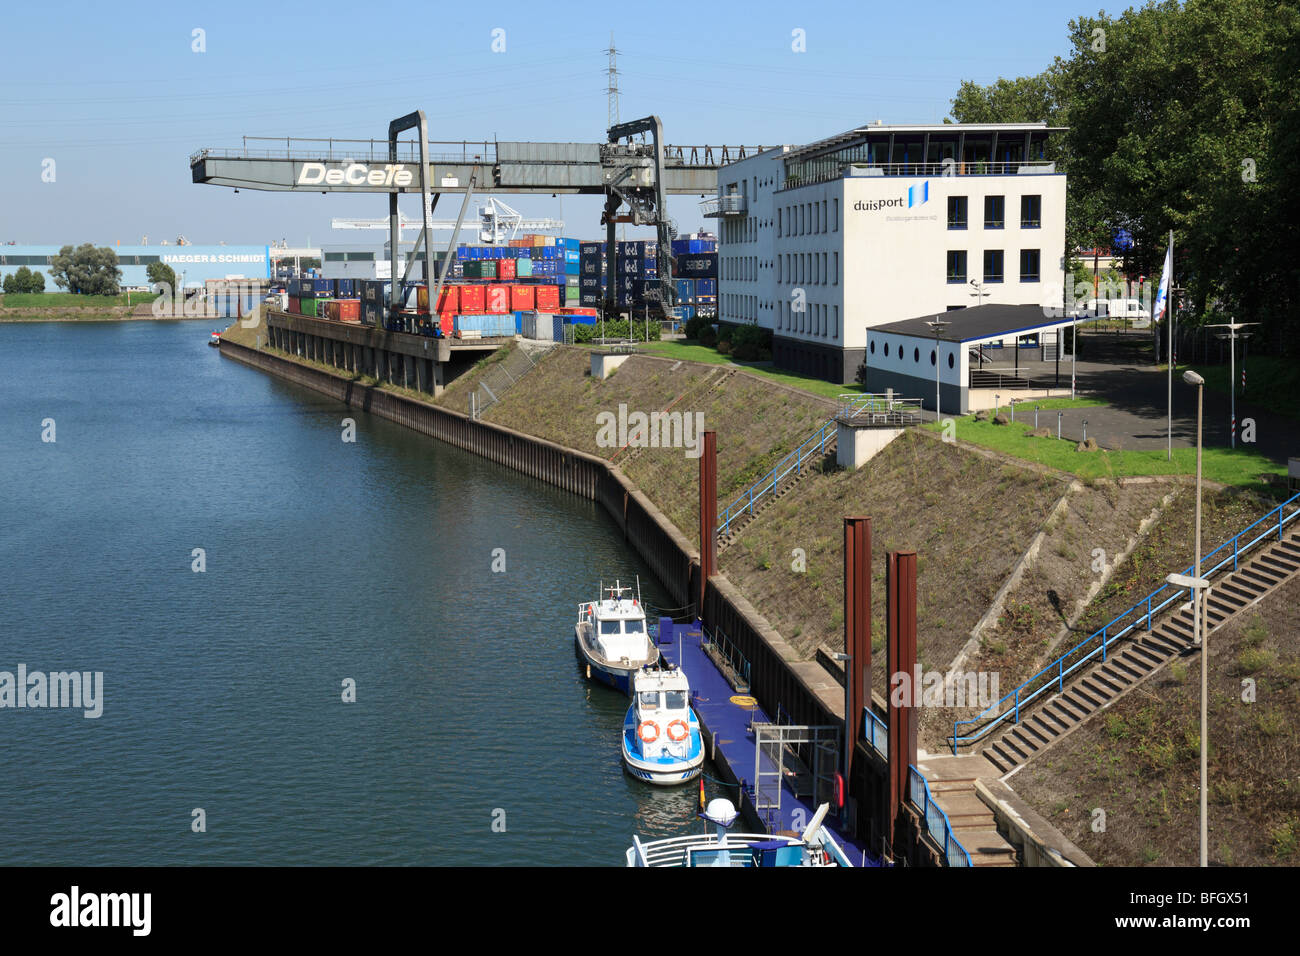 D-Duisburg, Rhine, Lower Rhine, Ruhr area, North Rhine-Westphalia, D-Duisburg-Ruhrort, harbour Duisburg, Ruhr port, Vincke Canal, container port, container terminal, boats, Route of Industrial Heritage Stock Photo